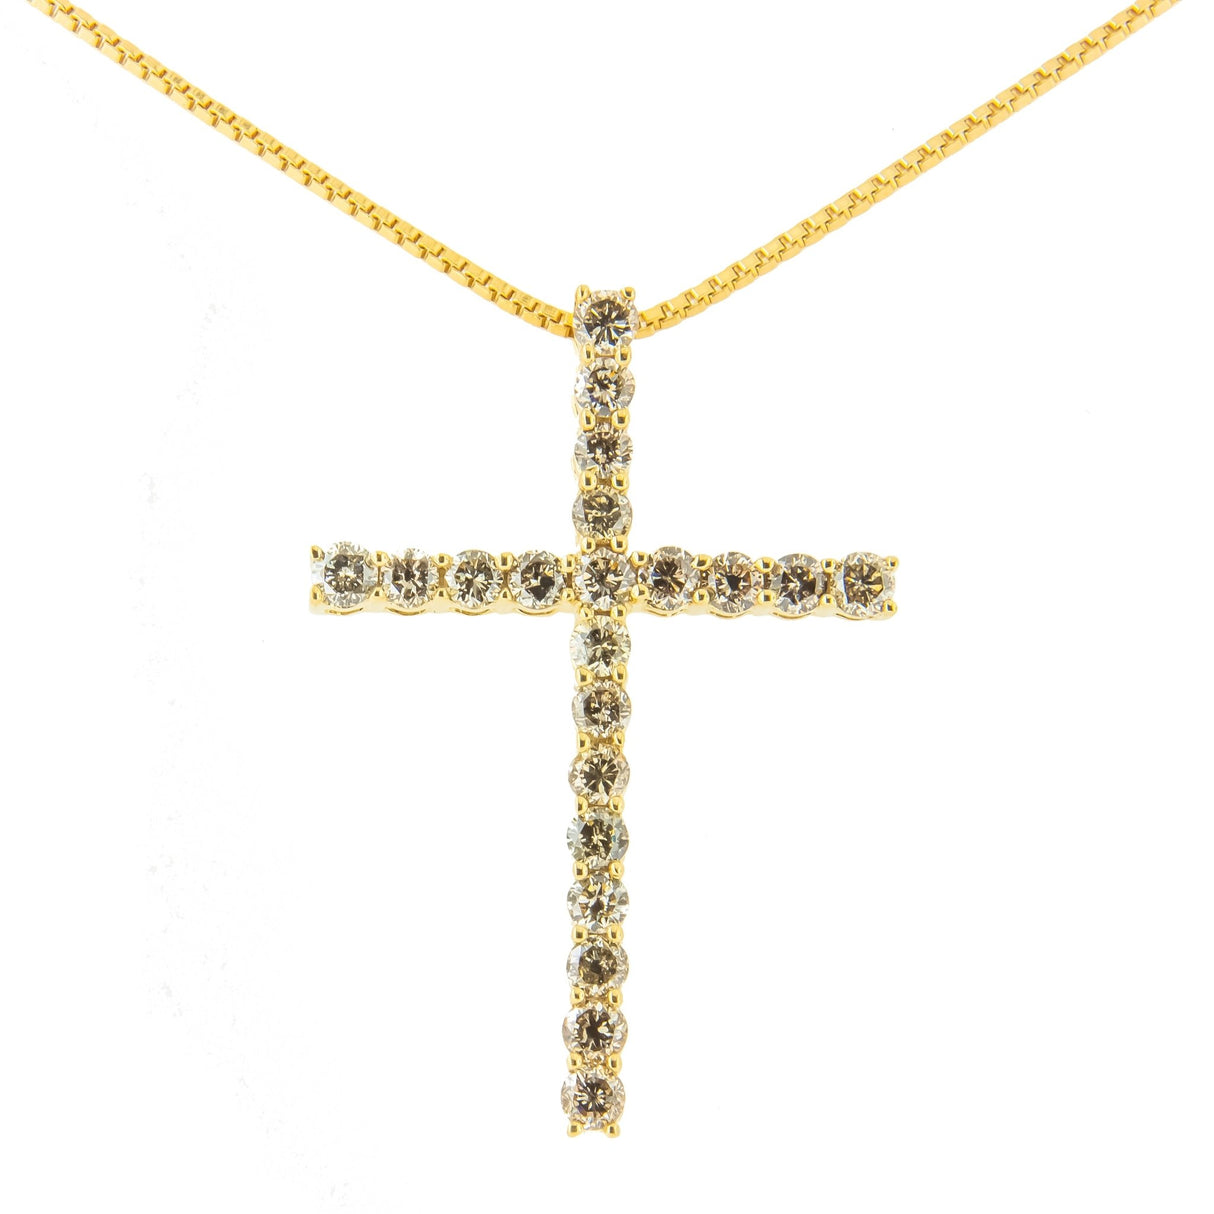 14K Yellow Gold Plated .925 Sterling Silver 1.0 Cttw Champagne Diamond Gold Cross Pendant Necklace For Women (K-L Color, I1-I2 Clarity)- 18 Inch - Tuesday Morning-Pendant Necklace